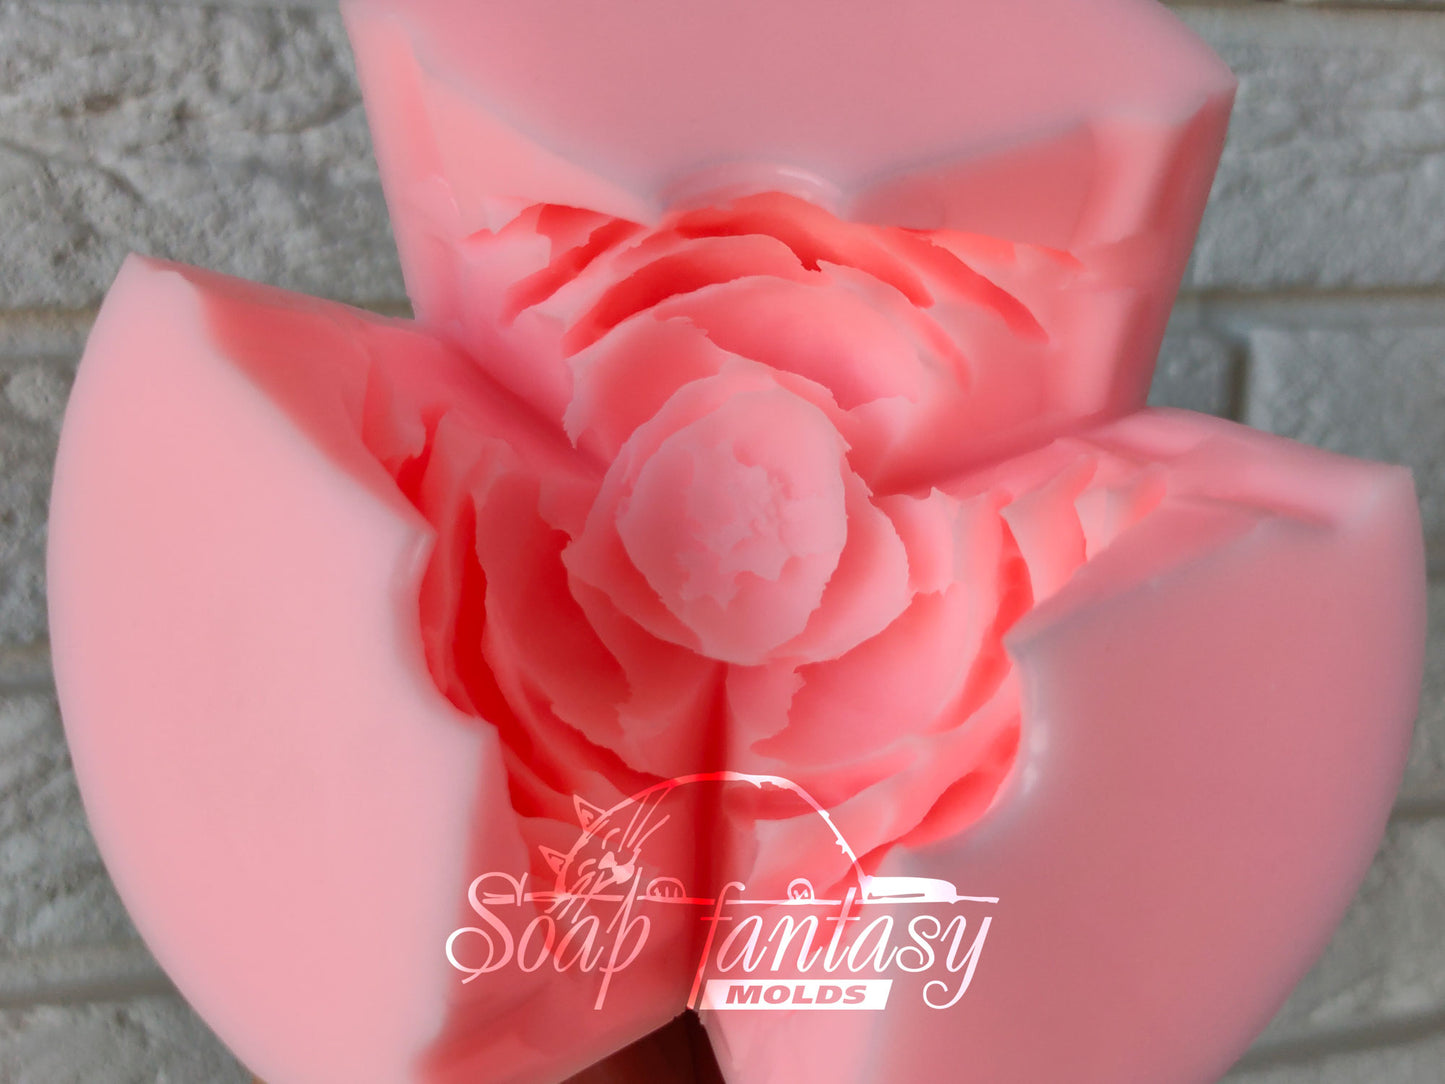 Peony "Sweet Harmony" silicone mold for soap making